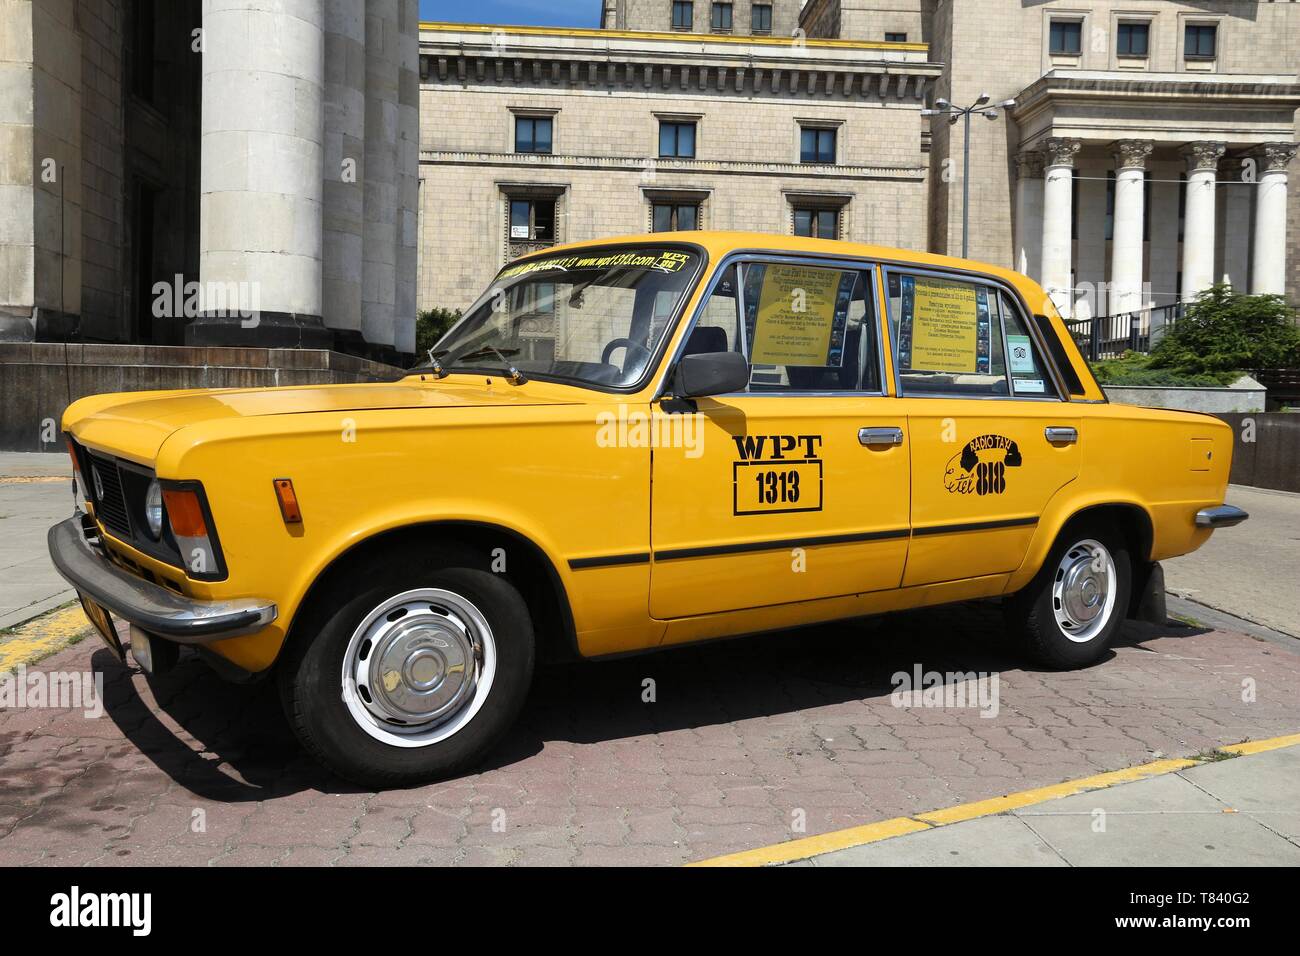 WARSAW, POLAND - JUNE 19, 2016: Oldtimer car - Polski Fiat 125p parked in Warsaw, Poland. The vehicle was manufactured in 1967-1991. Stock Photo